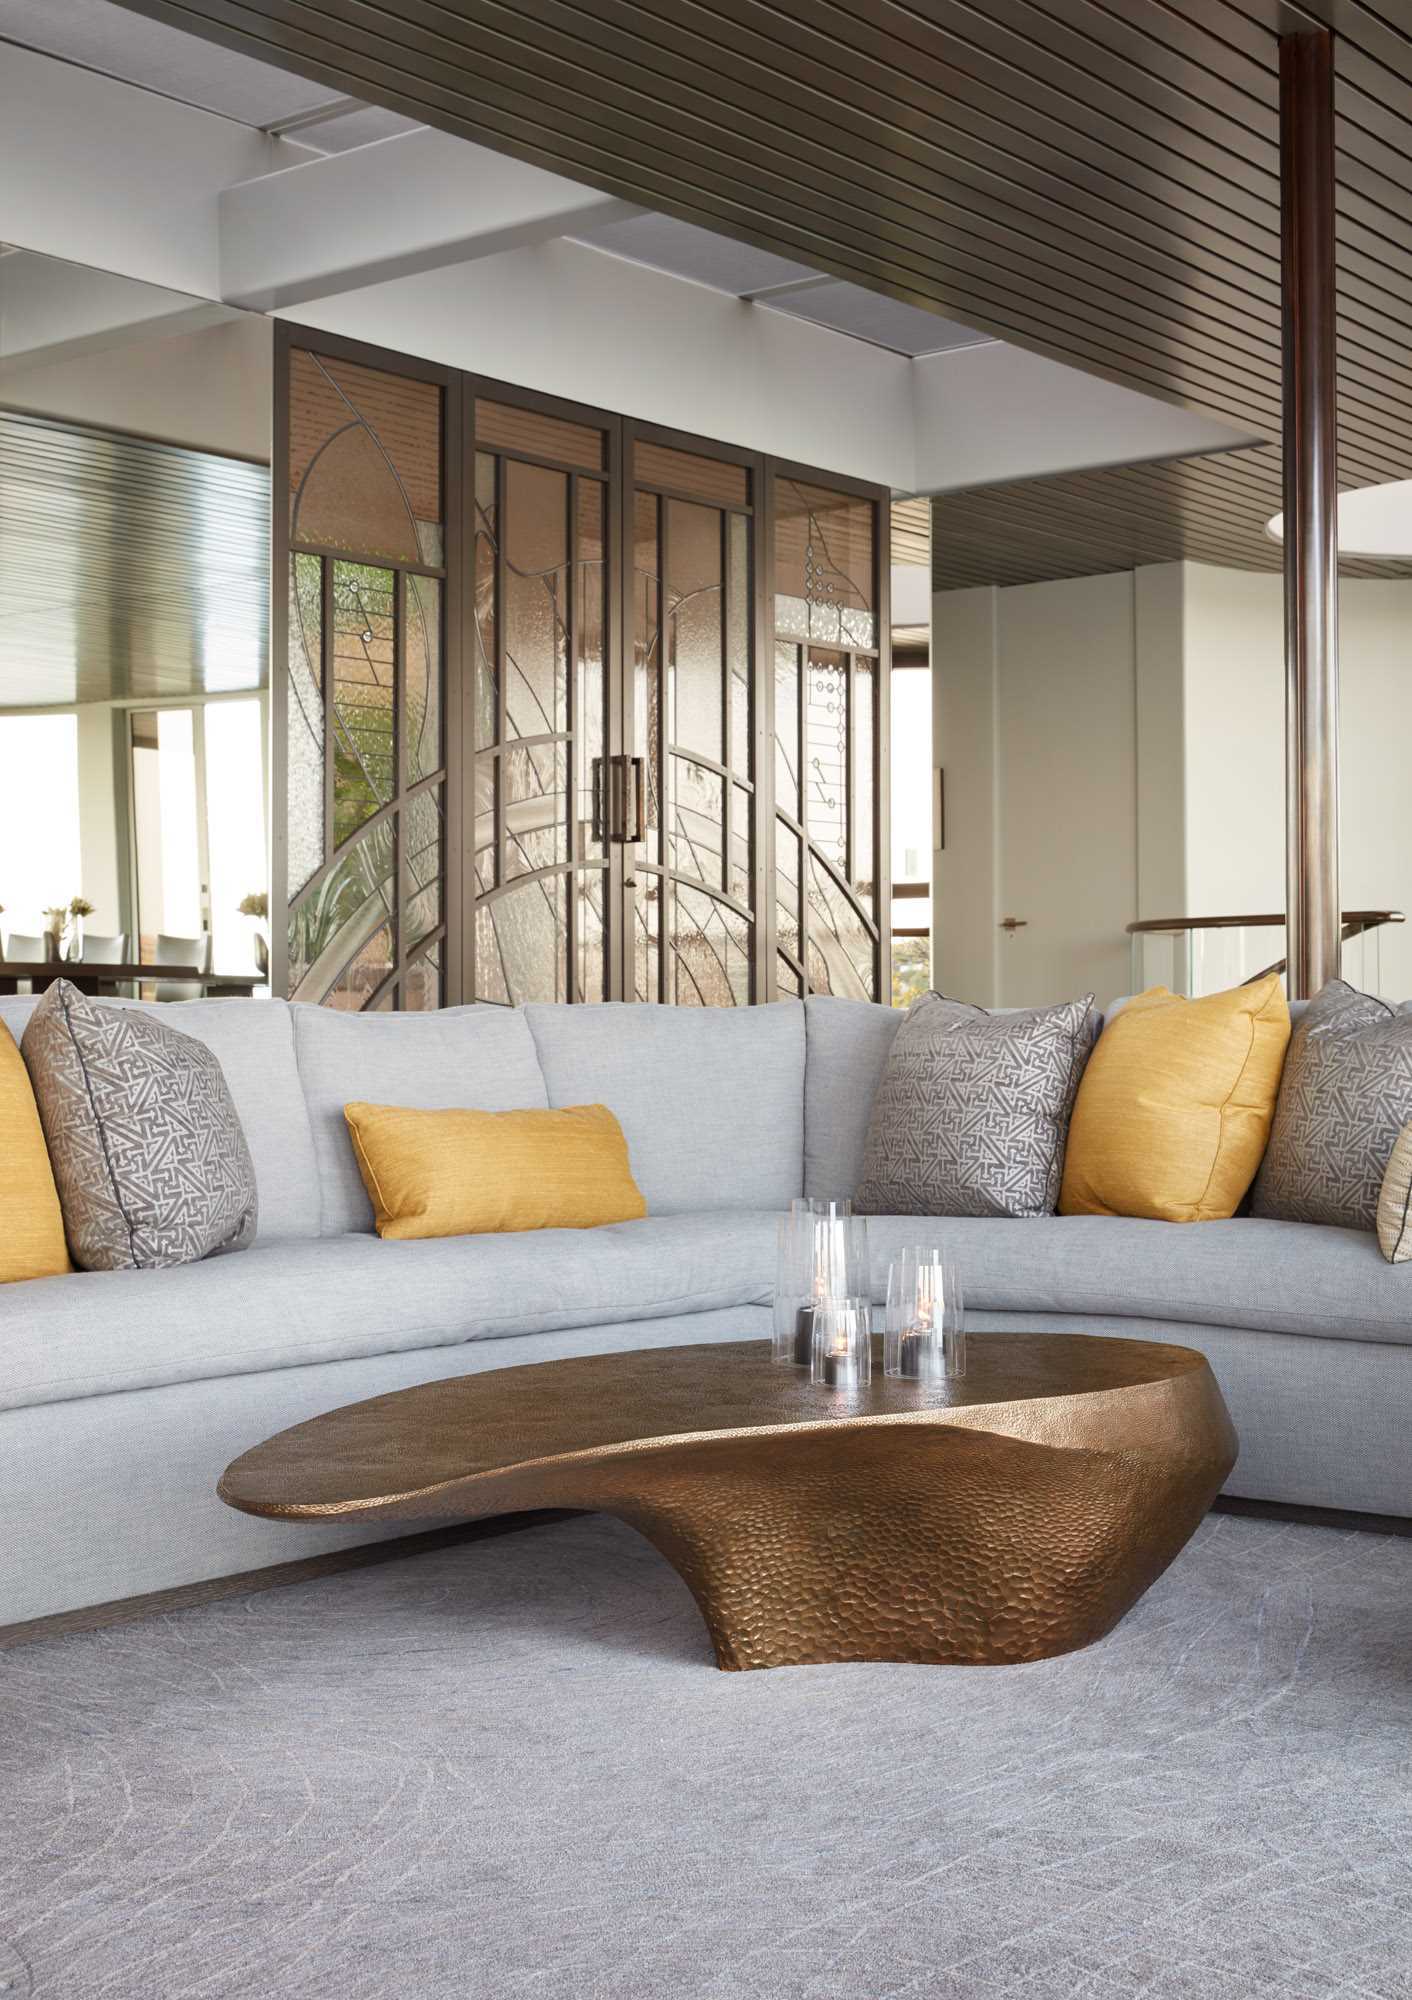 A custom curved sofa in the living room was made to fit perfectly with the room’s curved windows.